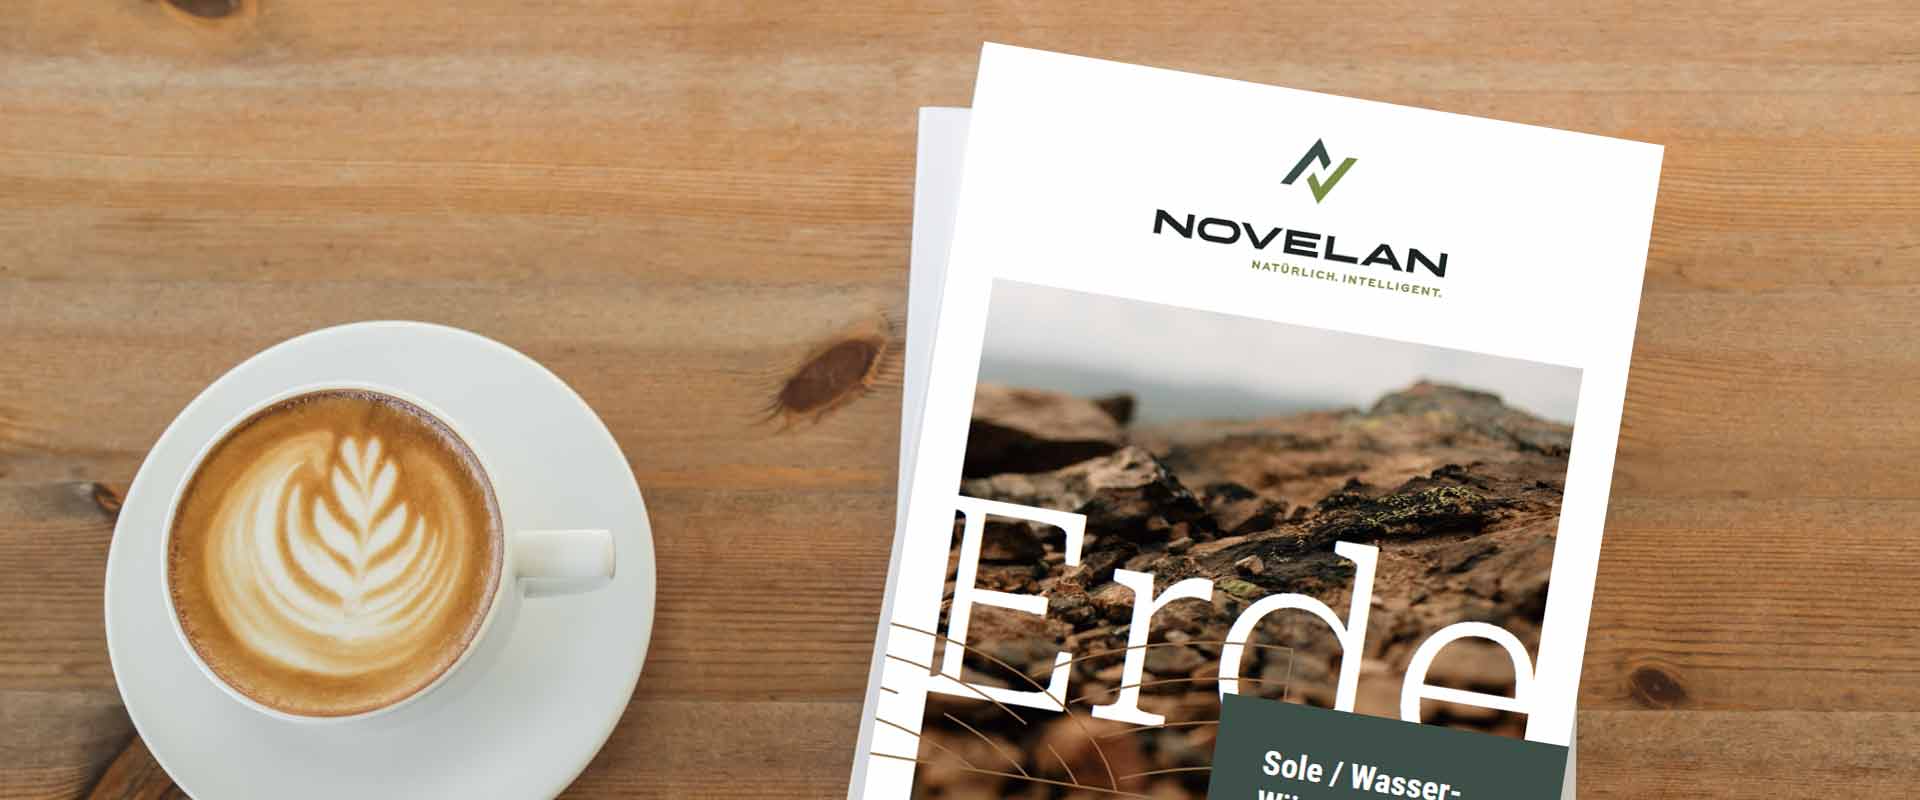 Two brochures lie next to a cup of coffee on a wooden table. On the front page, there is the NOVELAN logo in the upper middle with a picture of soil underneath on which it says, “soil”.